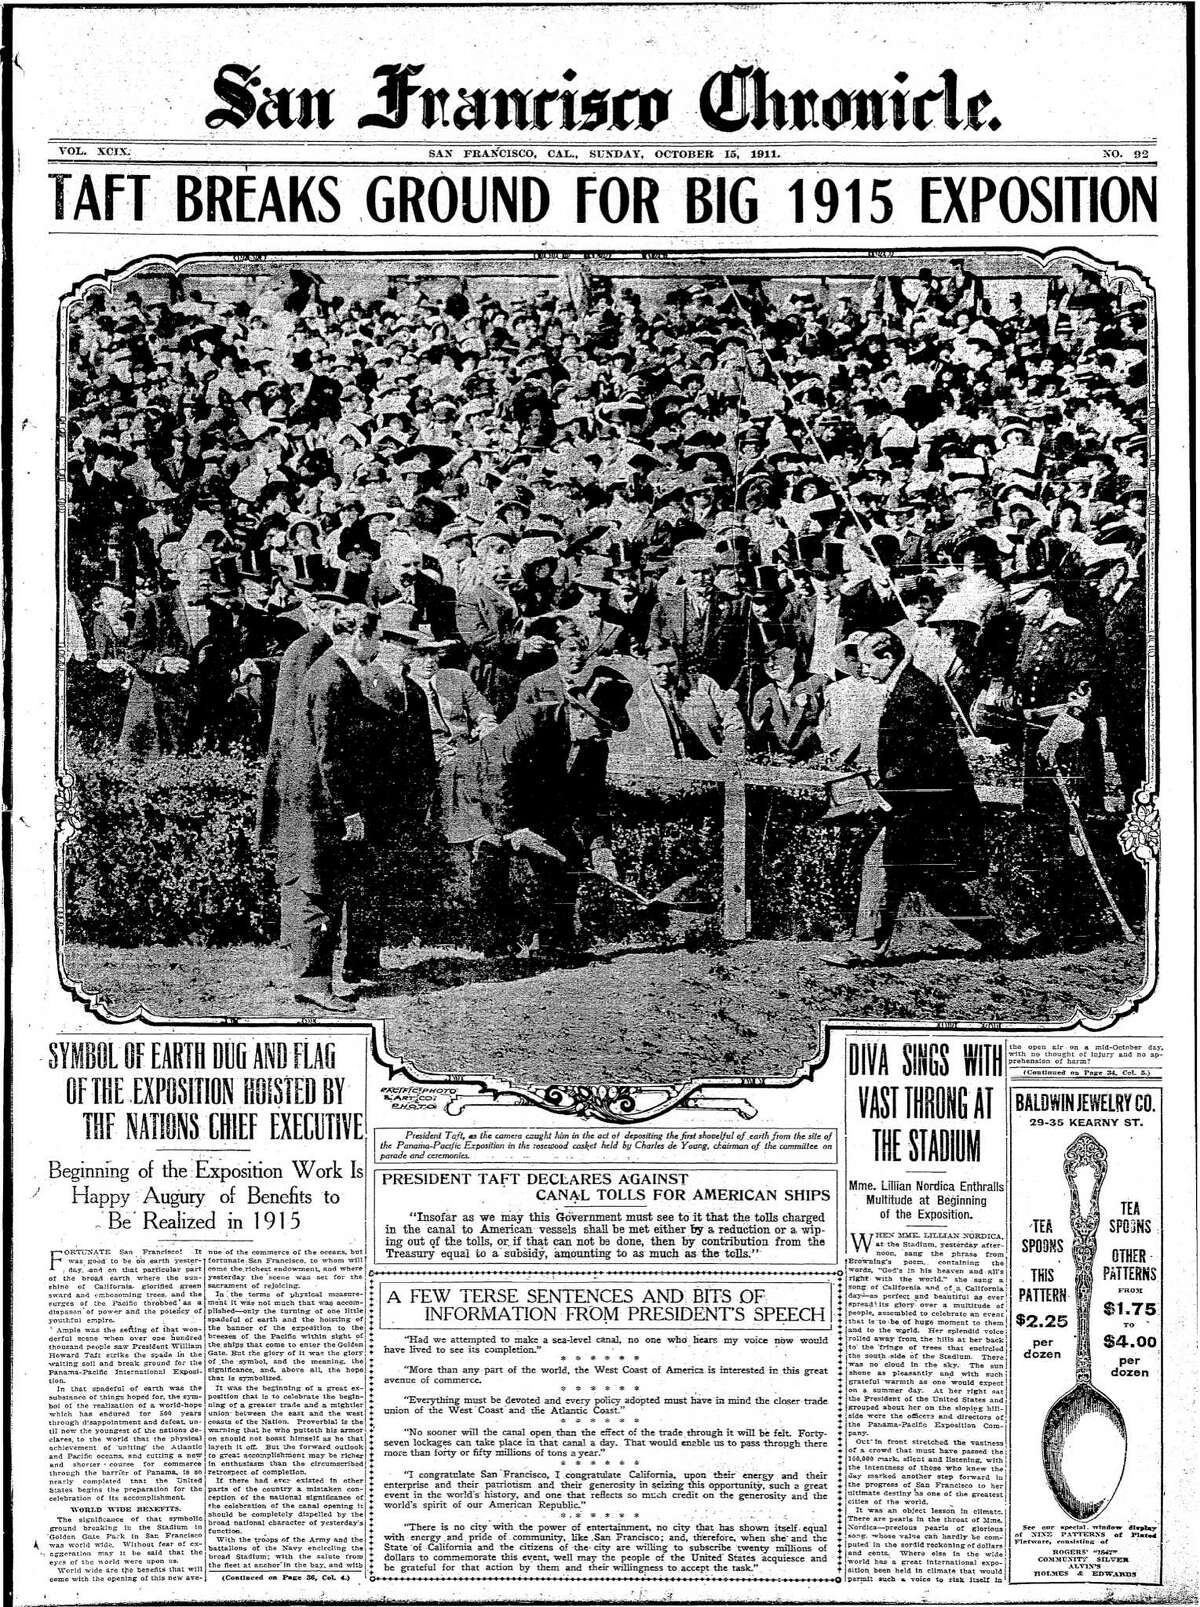 President Howard Taft participating in the groundbreaking for the 1915 Pan Pacific International Exposition in San Francisco during a West Coast visit October 15 1911 San Francisco Chronicle Front Page